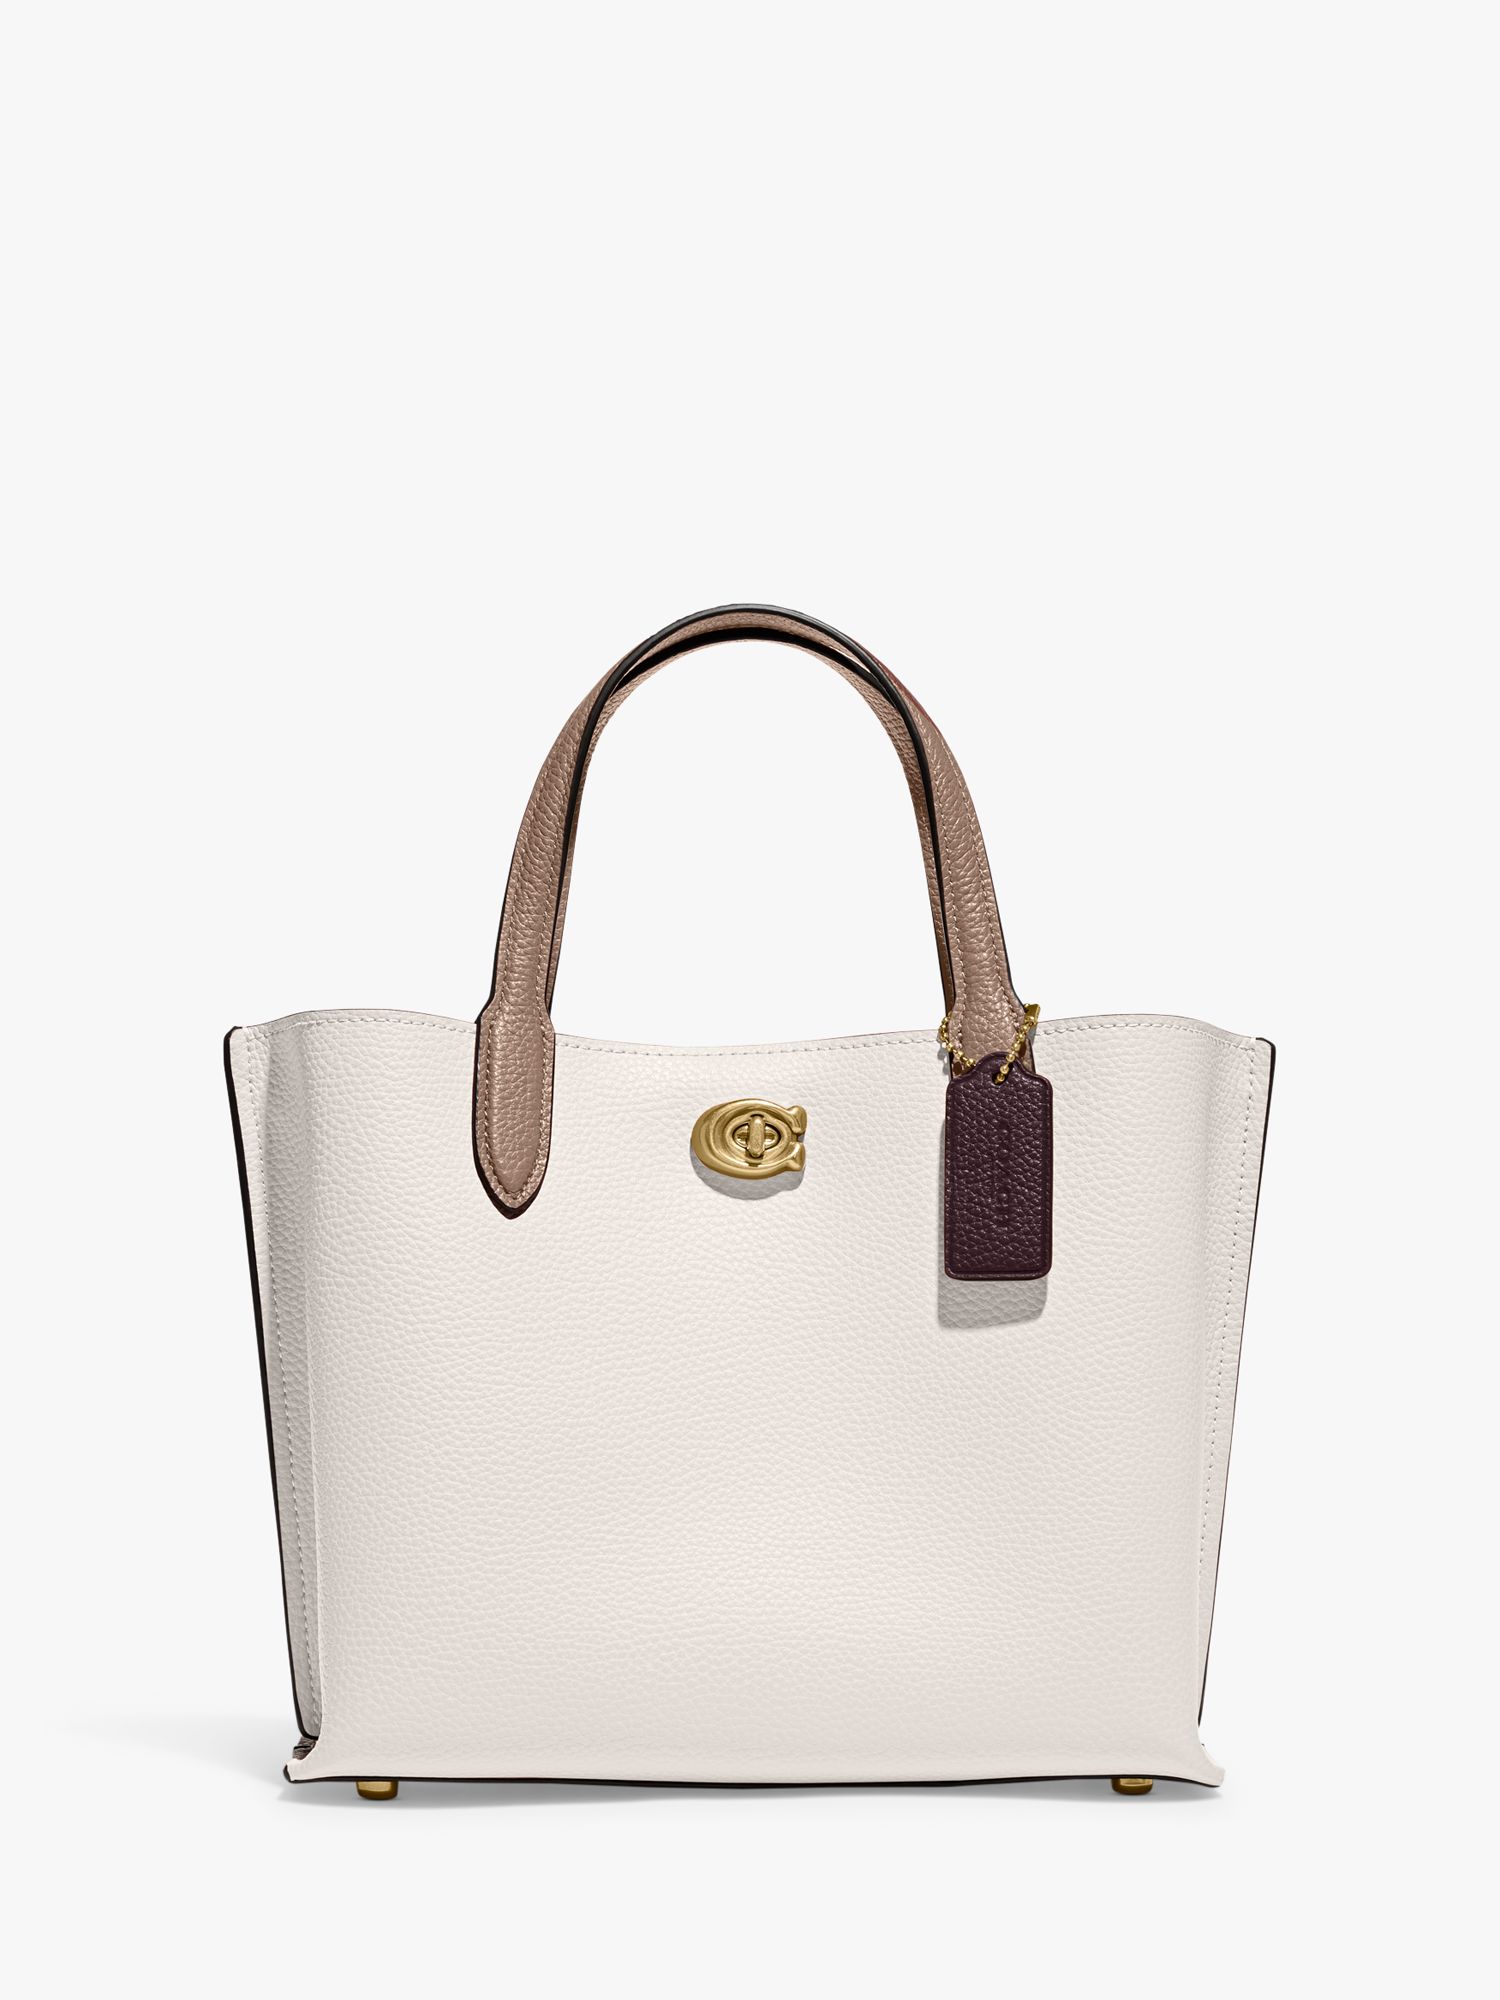 Coach Willow 24 Leather Shoulder Bag, Chalk at John Lewis & Partners